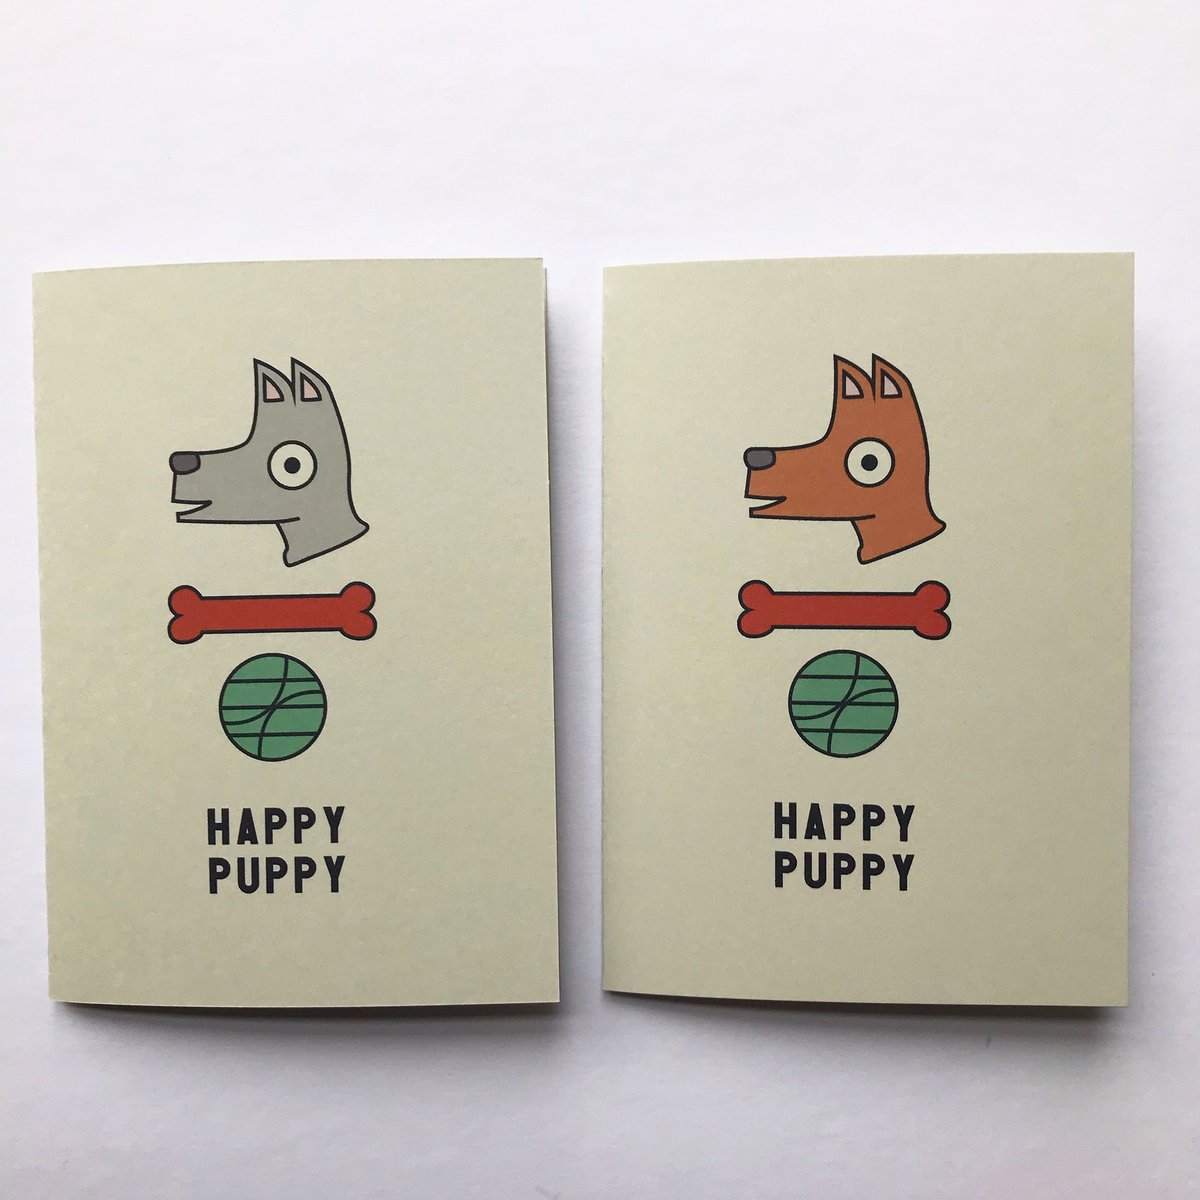 Image of HAPPY PUPPY GREETINGS CARD BY fingsMCR